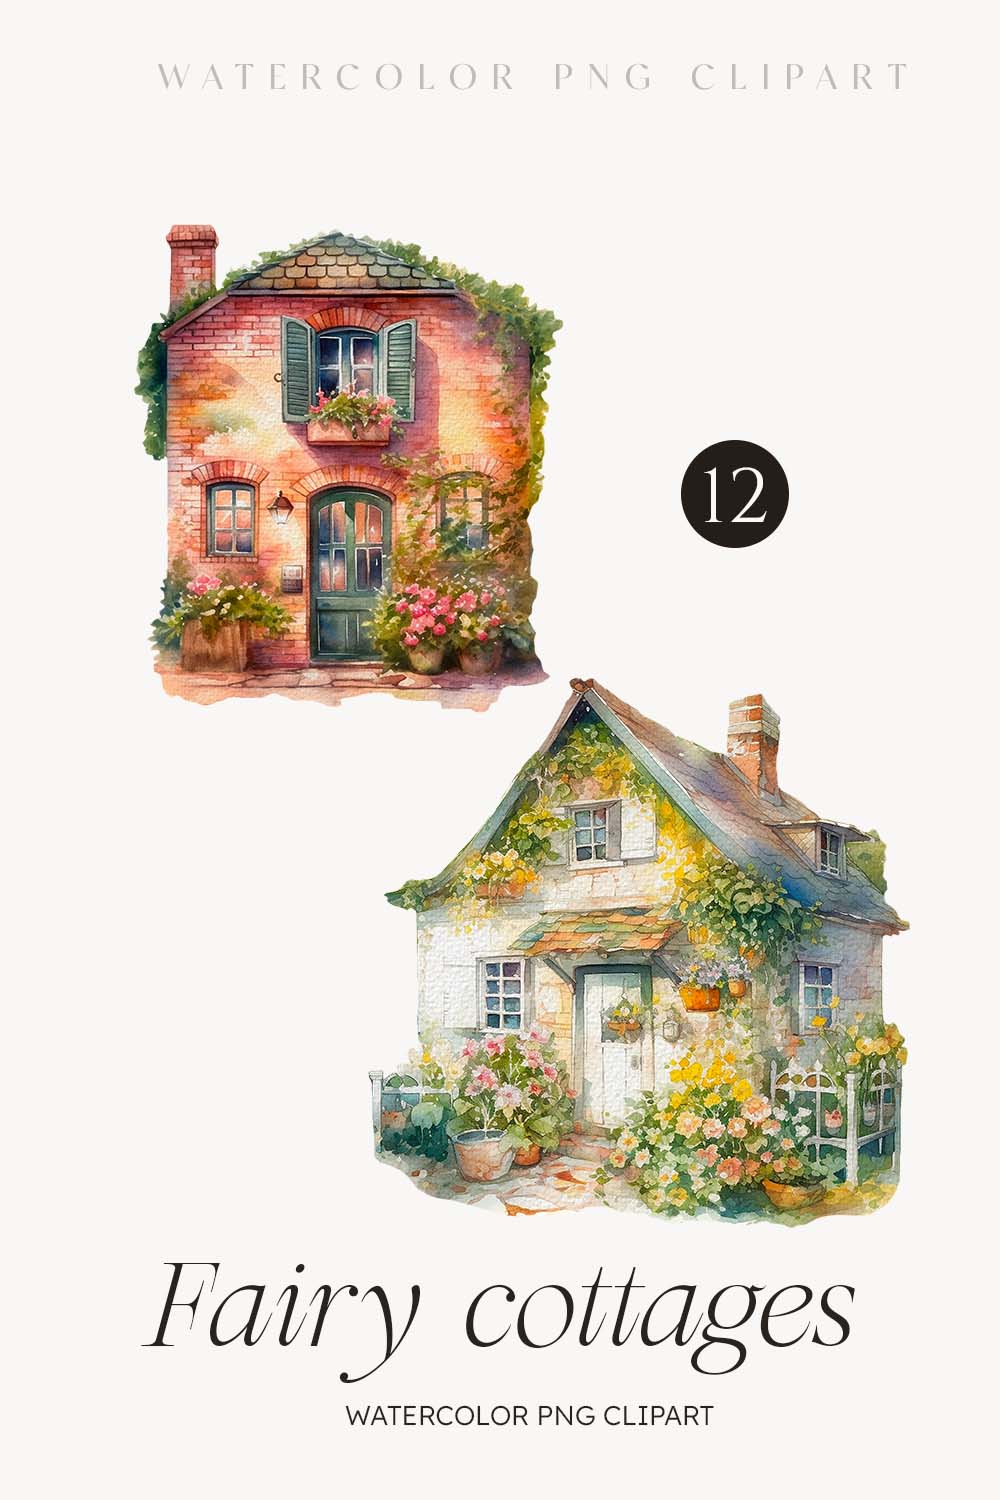 Watercolor Fairy cottages clipart - 12 items in PNG Digital Set of watercolor style, collection includes 12 stunning houses each in different designs pinterest preview image.